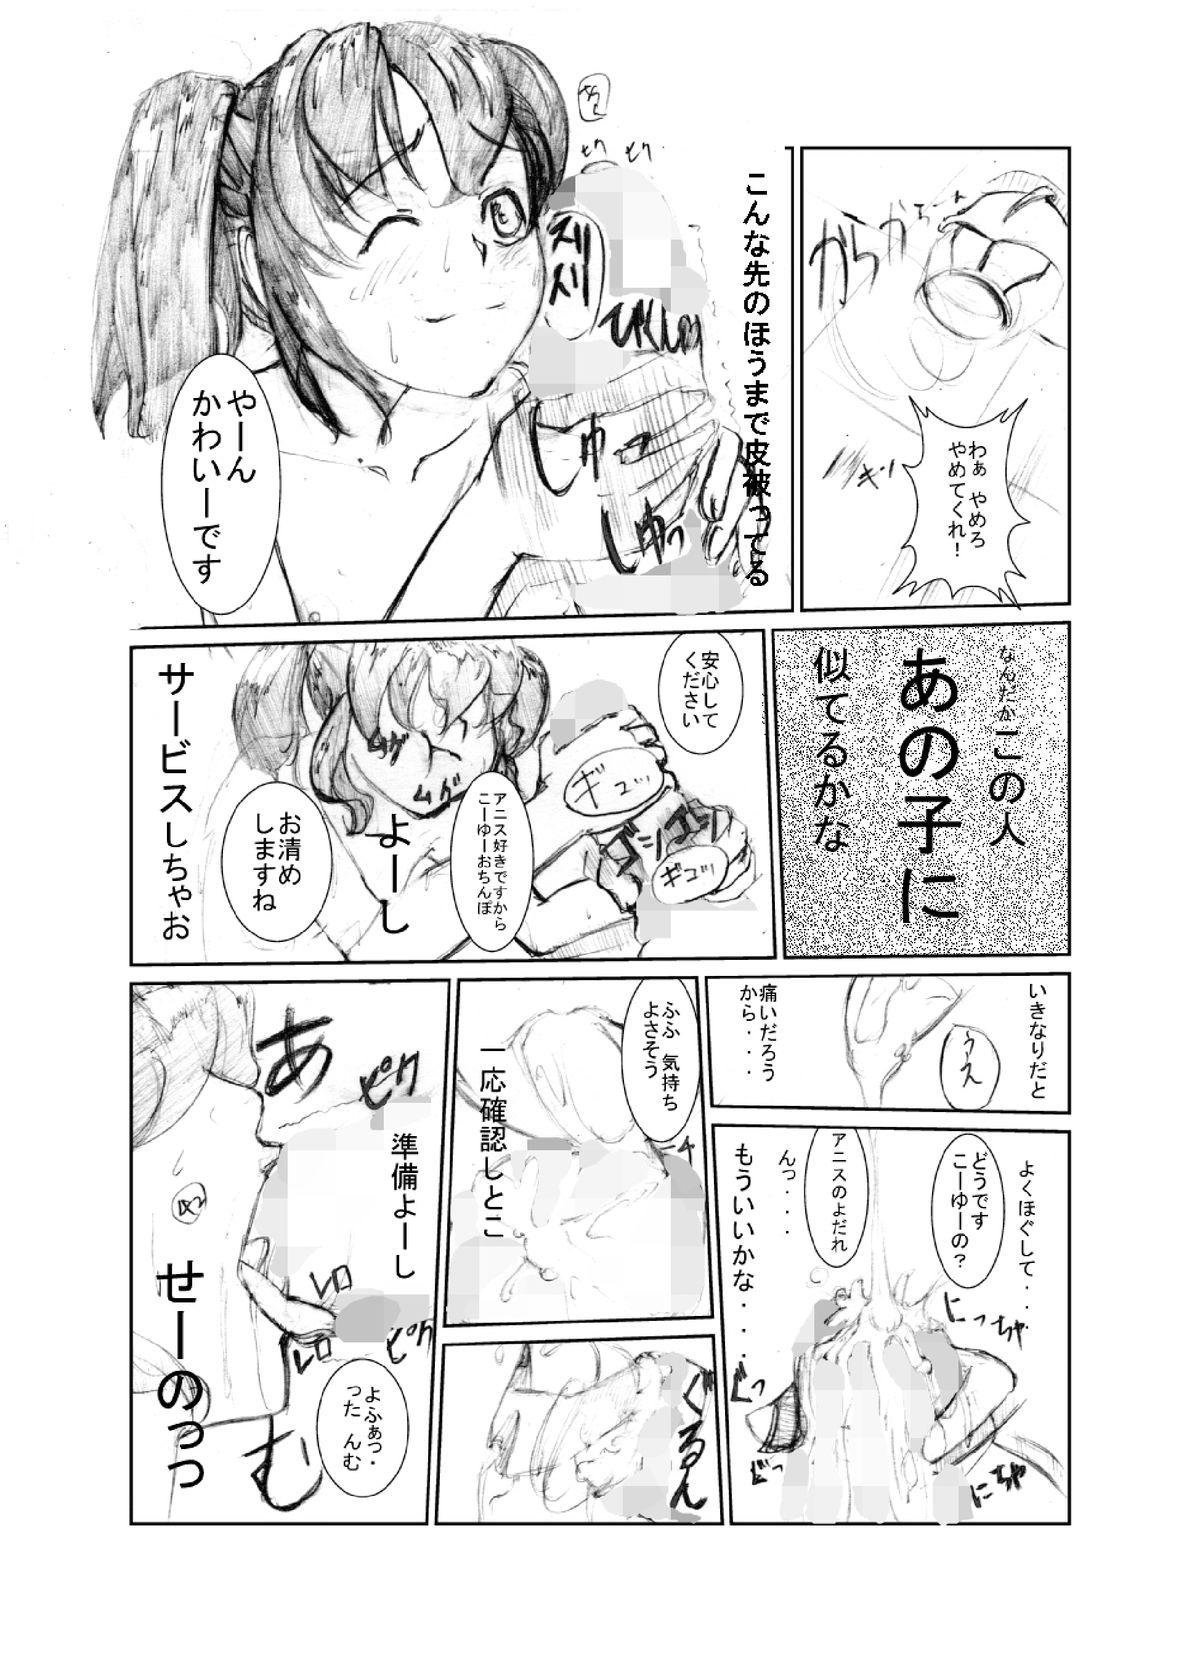 Interracial 虹は溶けゆく 朝焼けに - Tales of the abyss Hot Fuck - Page 11